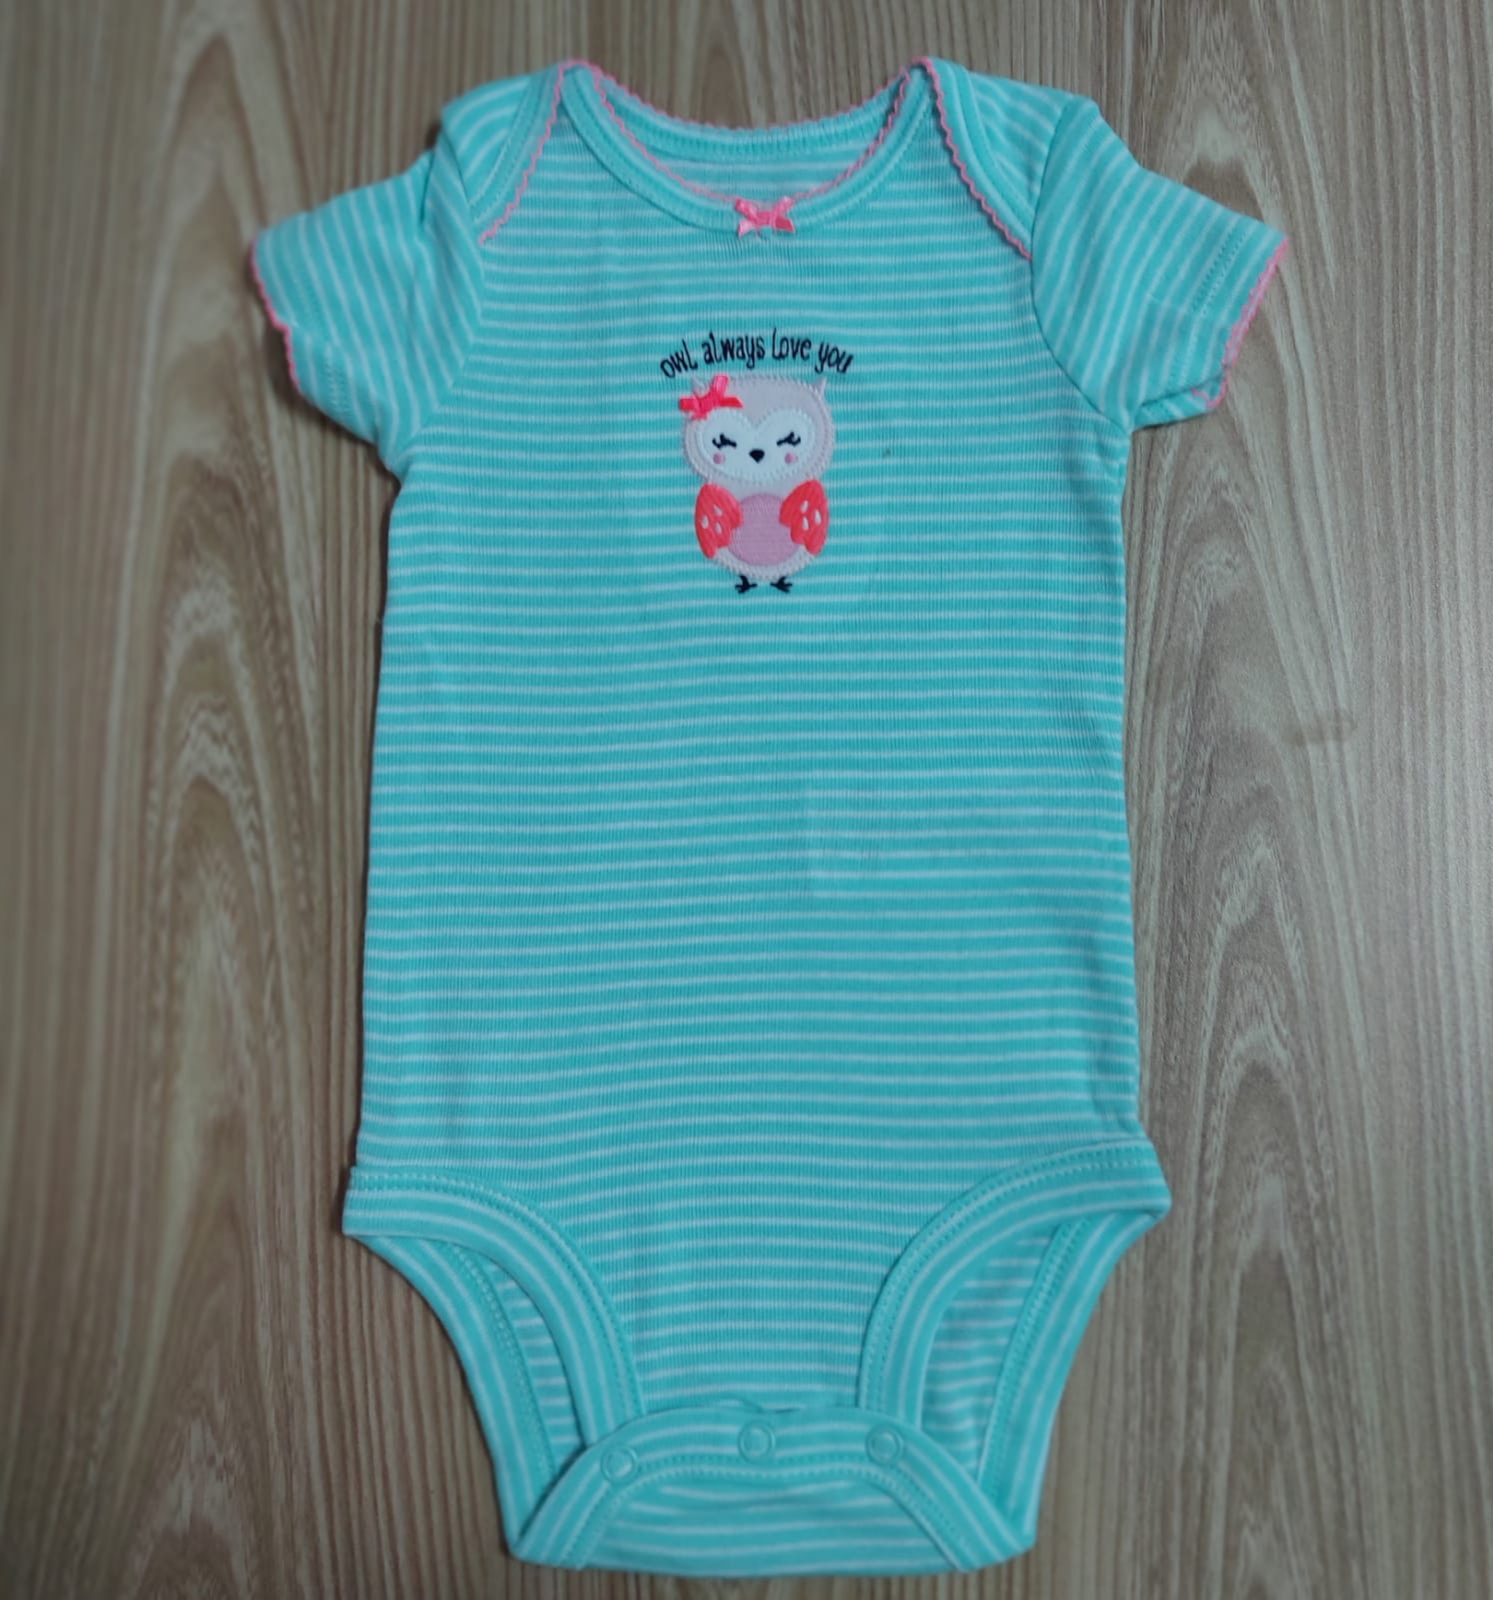 Simple Joys made by Carters Child Size 6-9 Months Blue Onesie